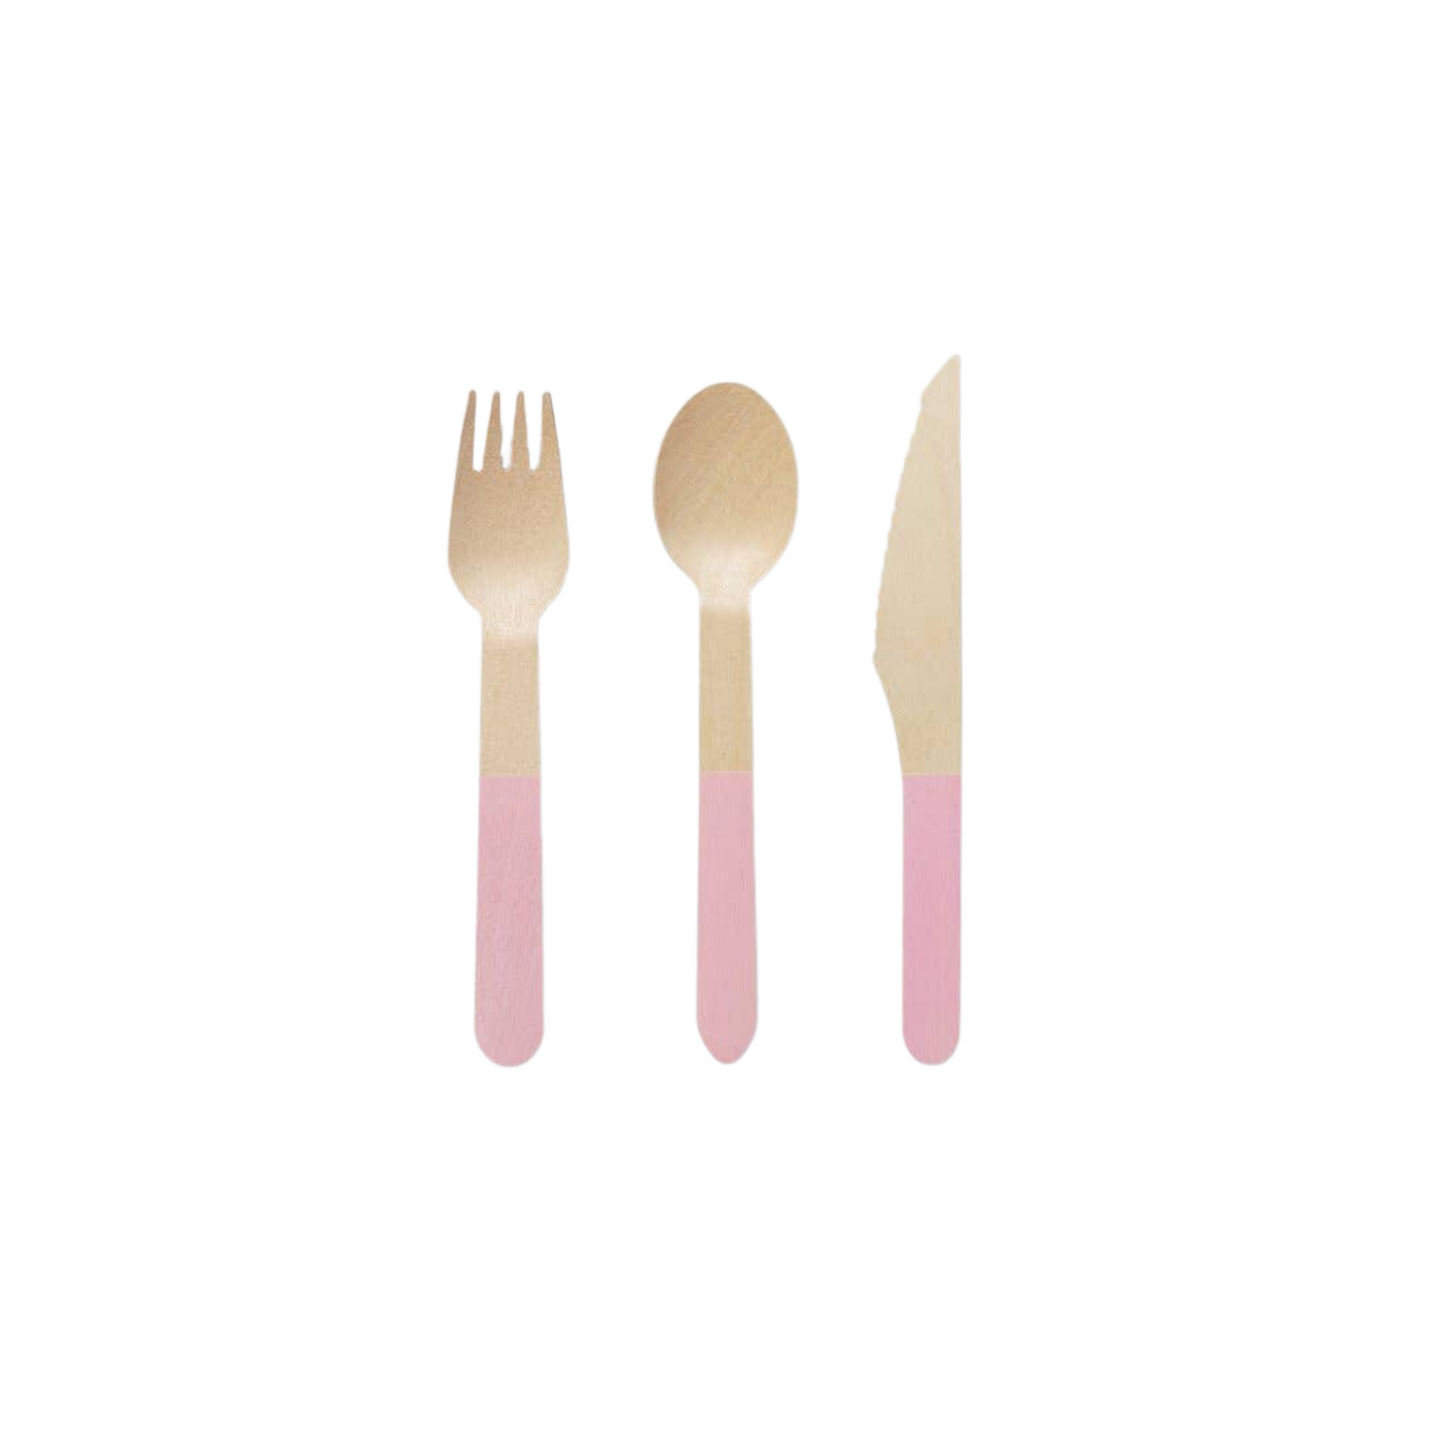 PALE PINK WOODEN CUTLERY SET